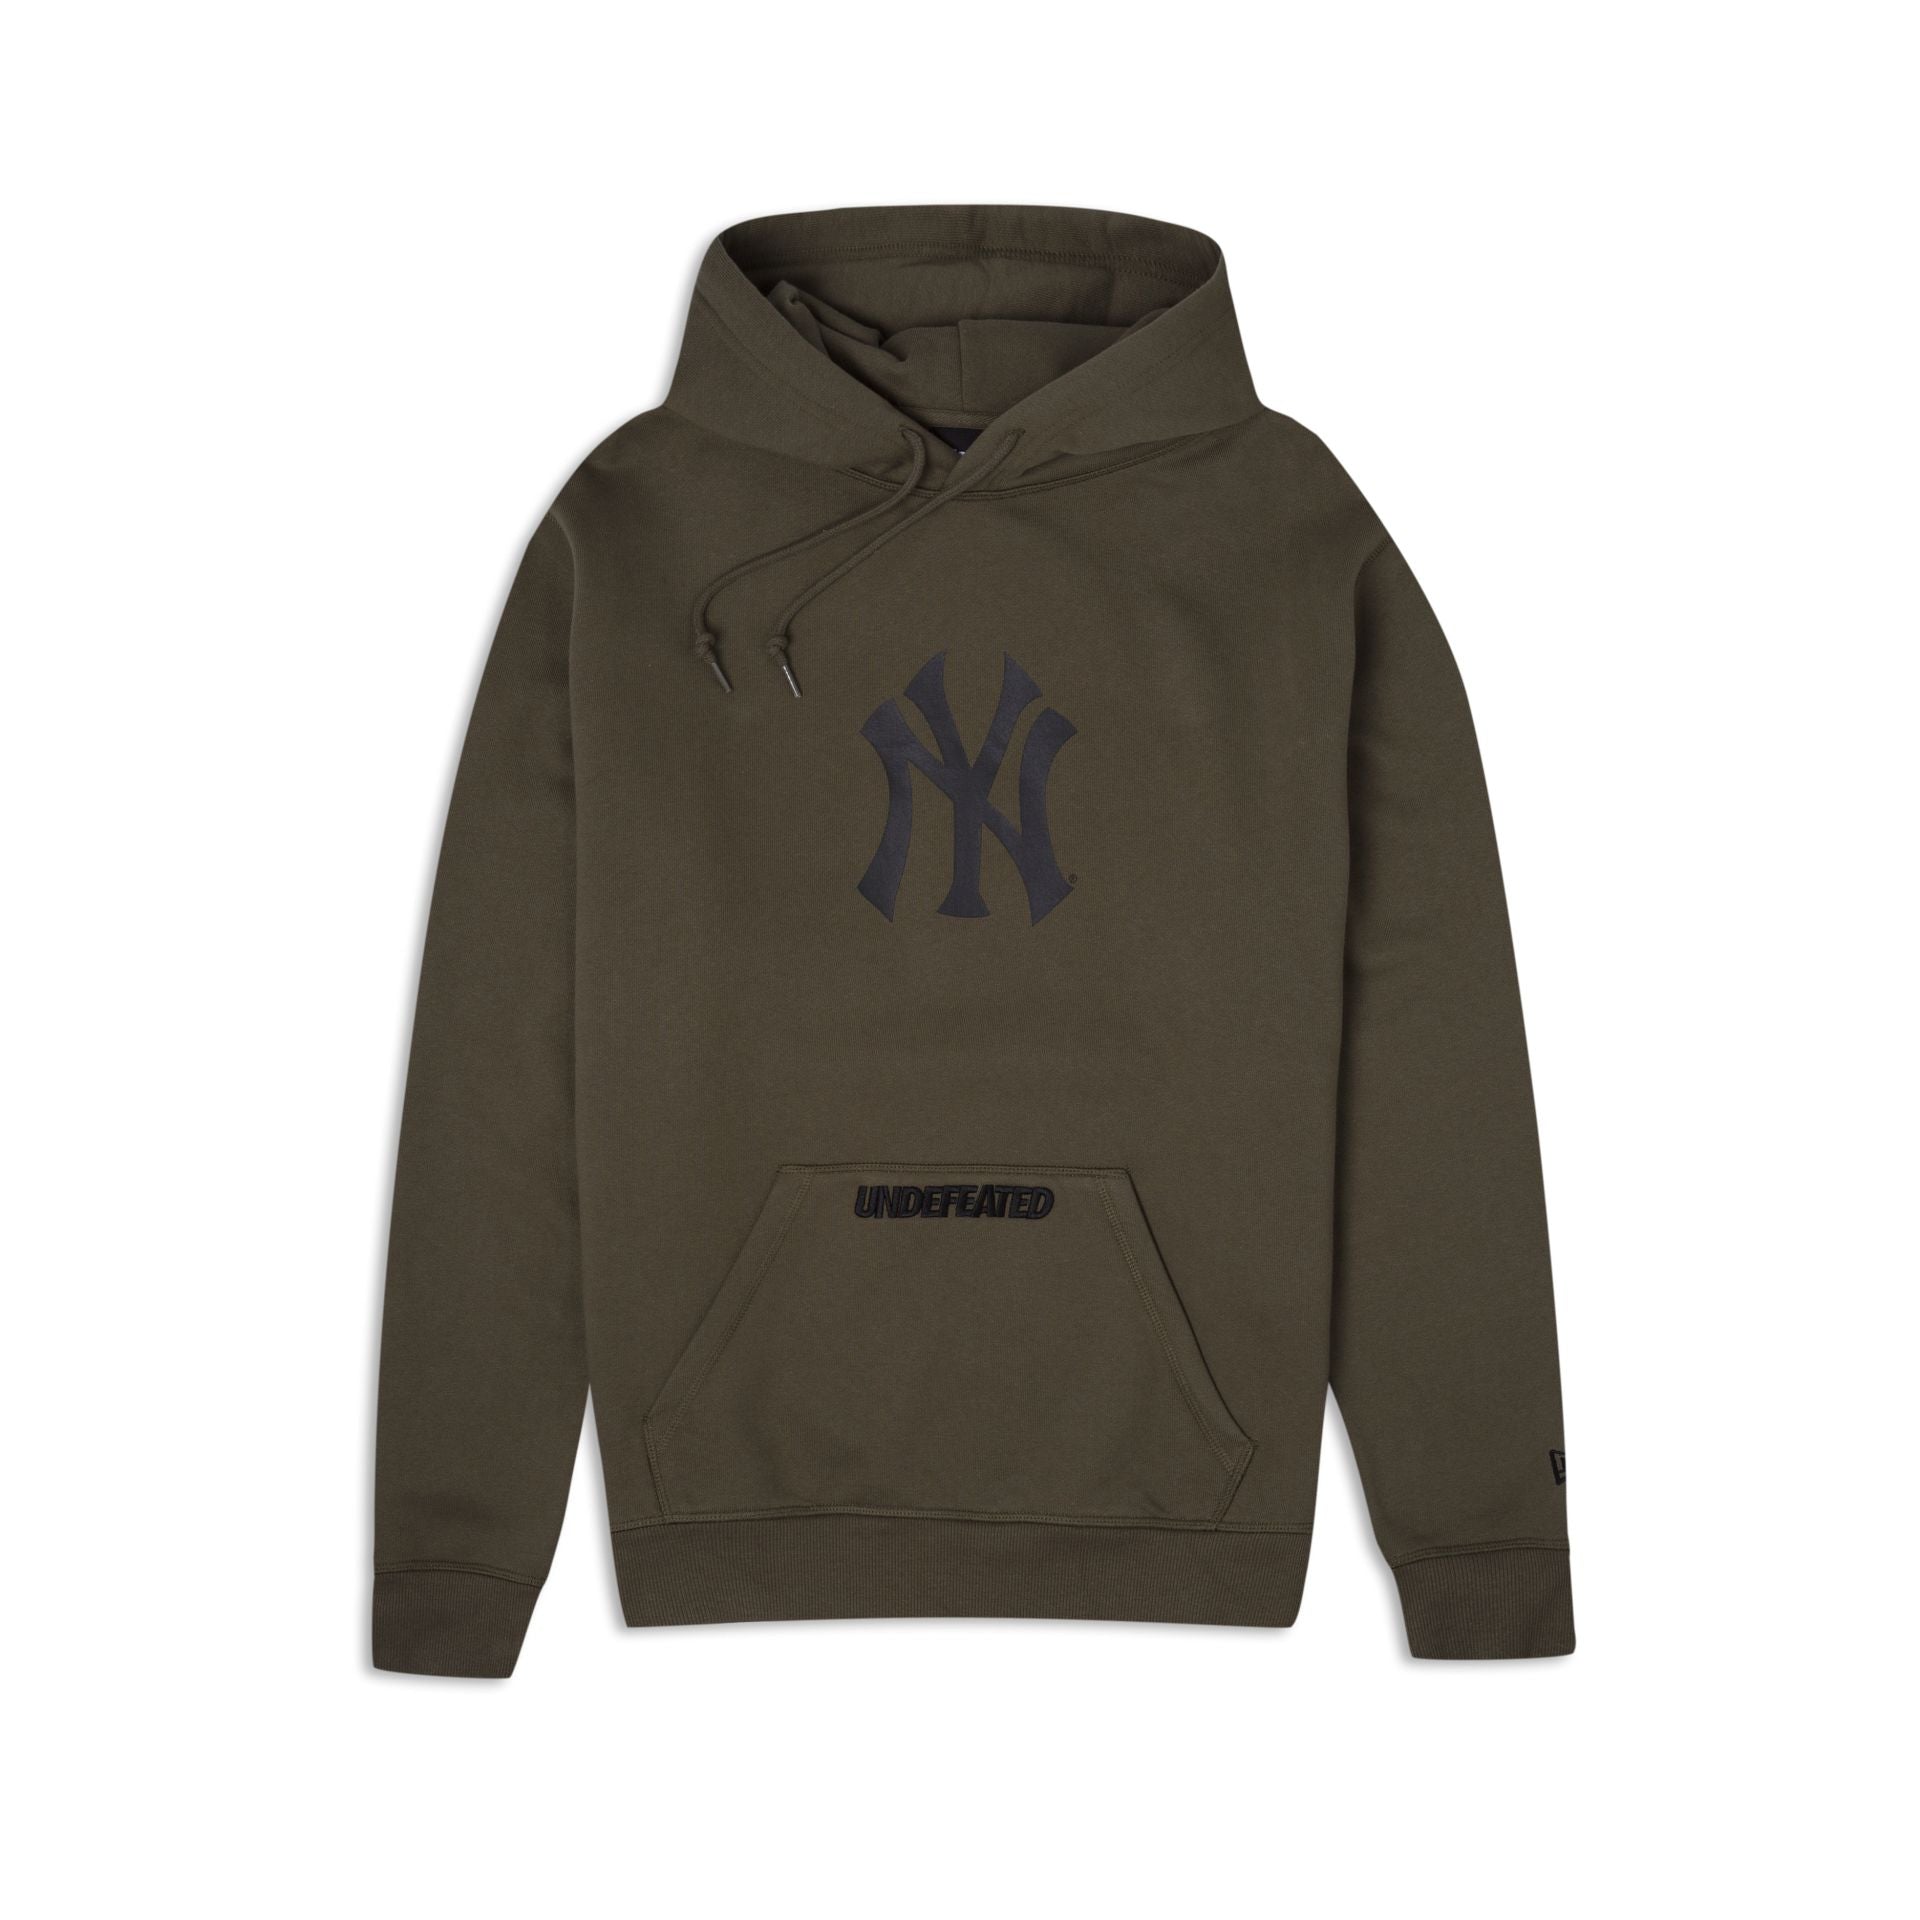 New York Yankees New Era x Undefeated Pullover Hoodie - Black